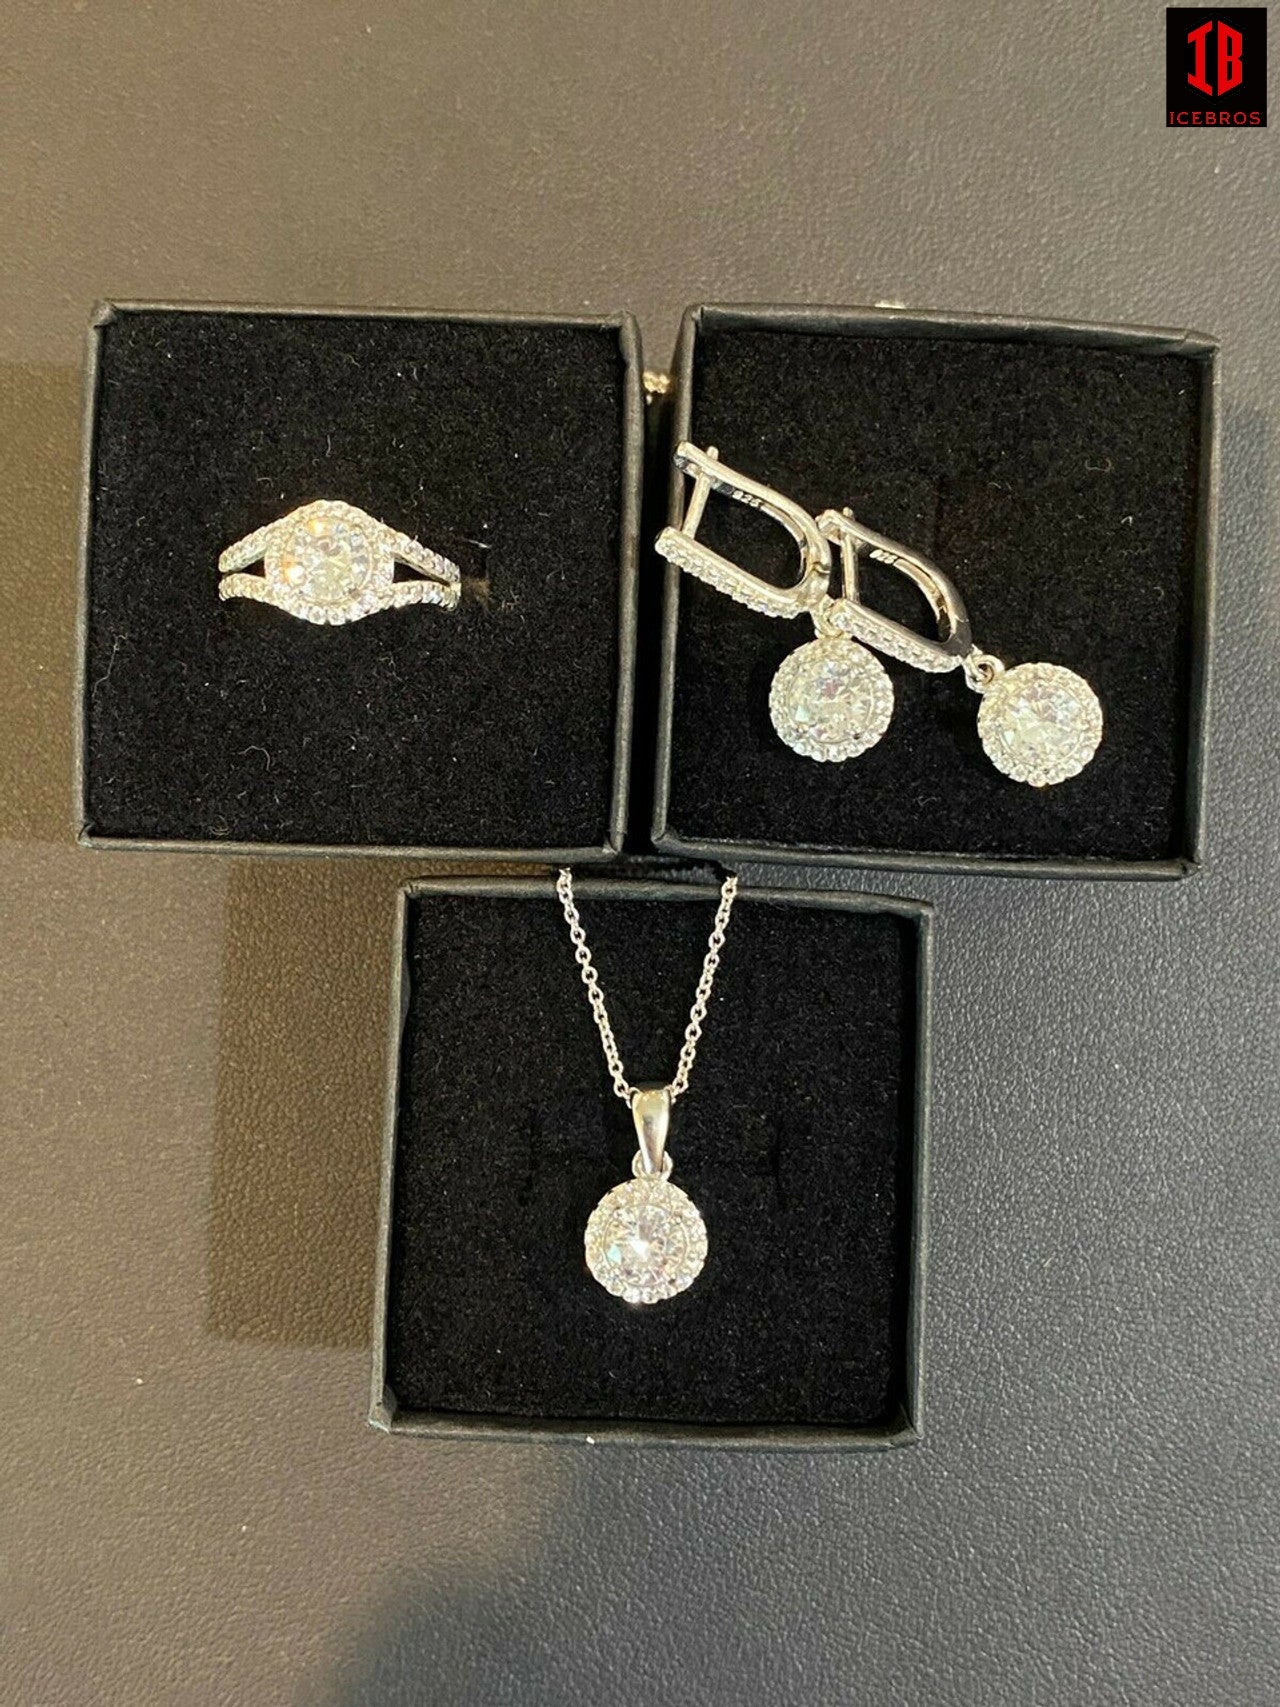 Real 925 Silver Diamond Ring Pendant Necklace Earrings Jewelry Set Wedding Girls